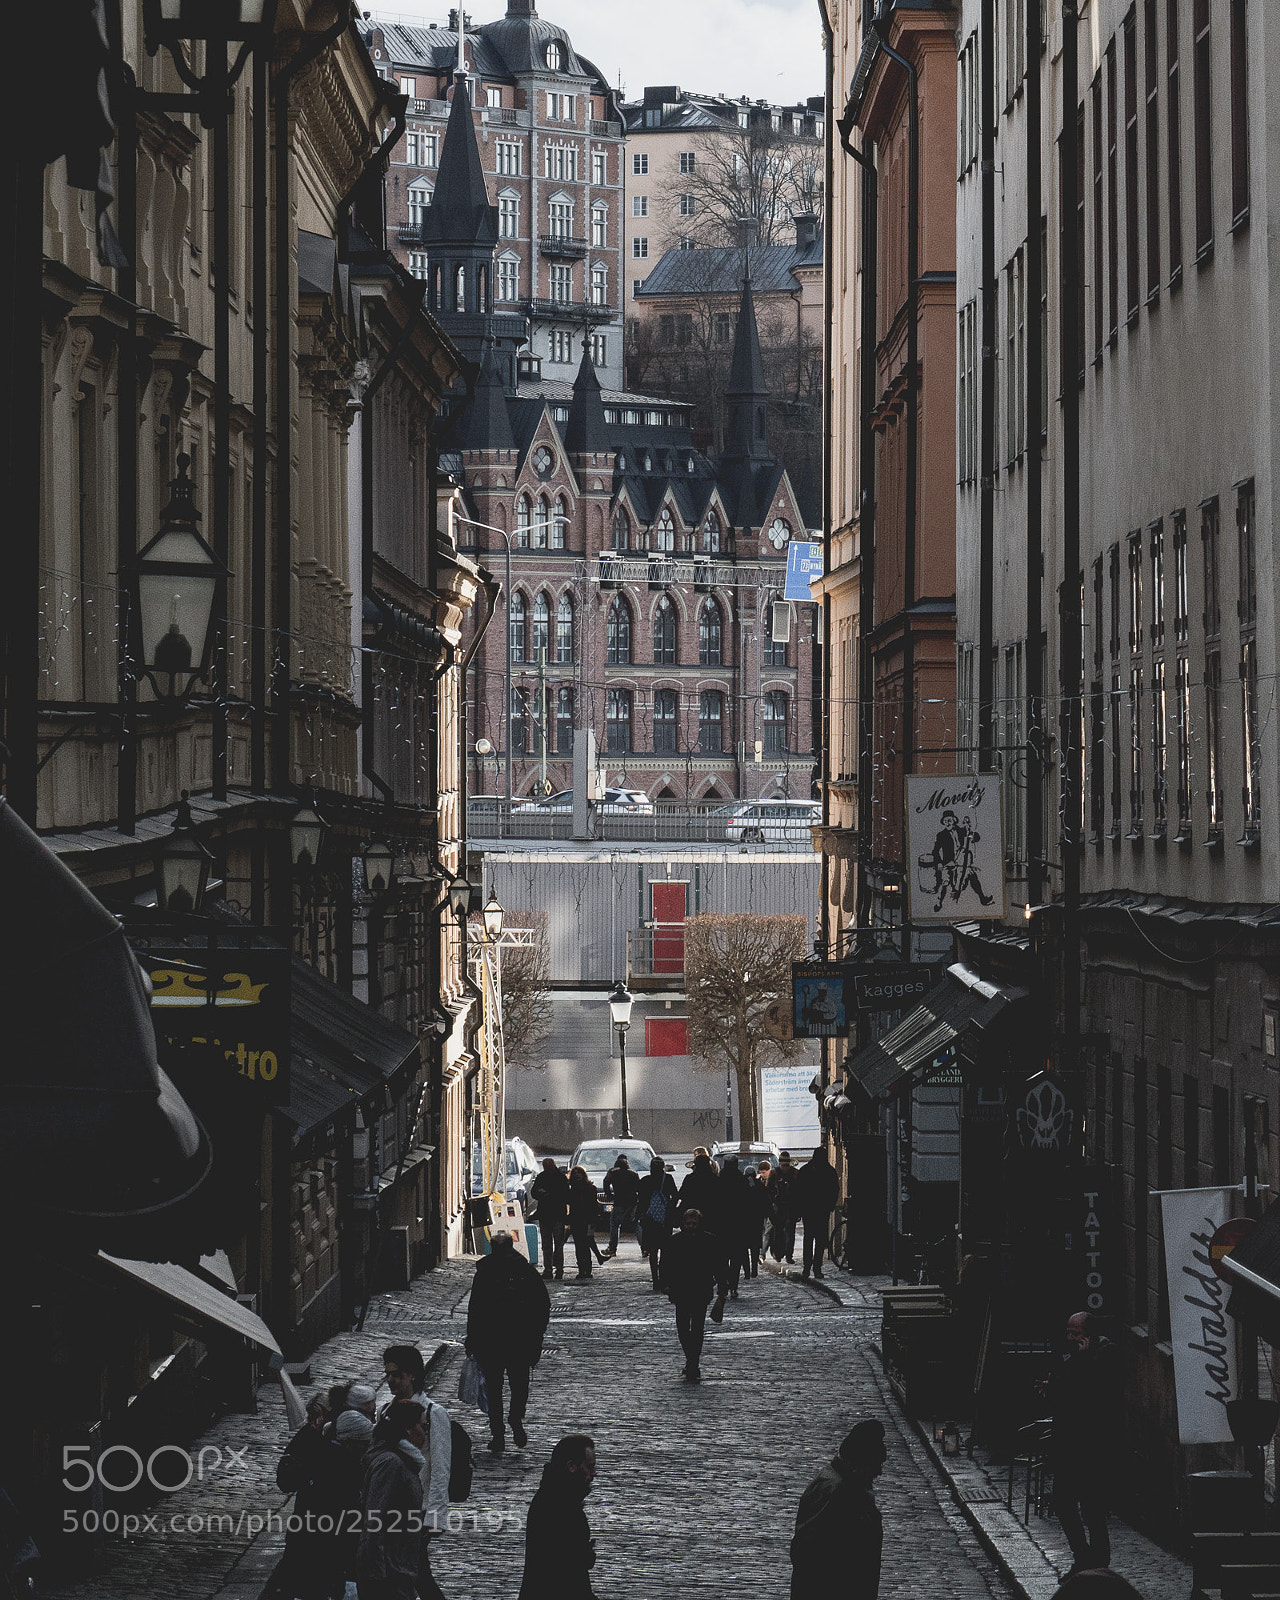 Sony a6300 sample photo. Old town, stockholm, sweden photography